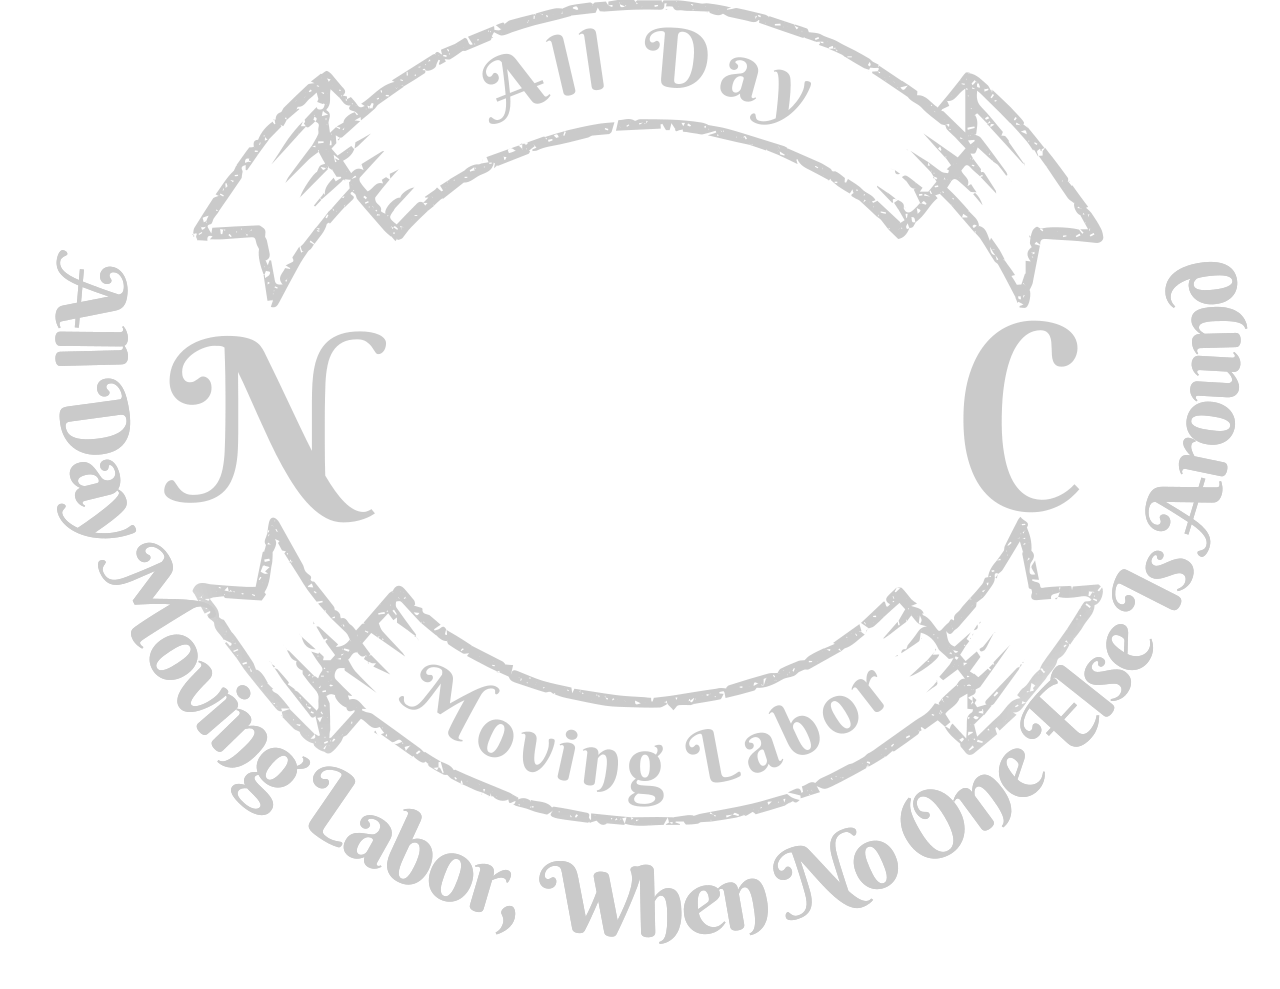 All Day's logo